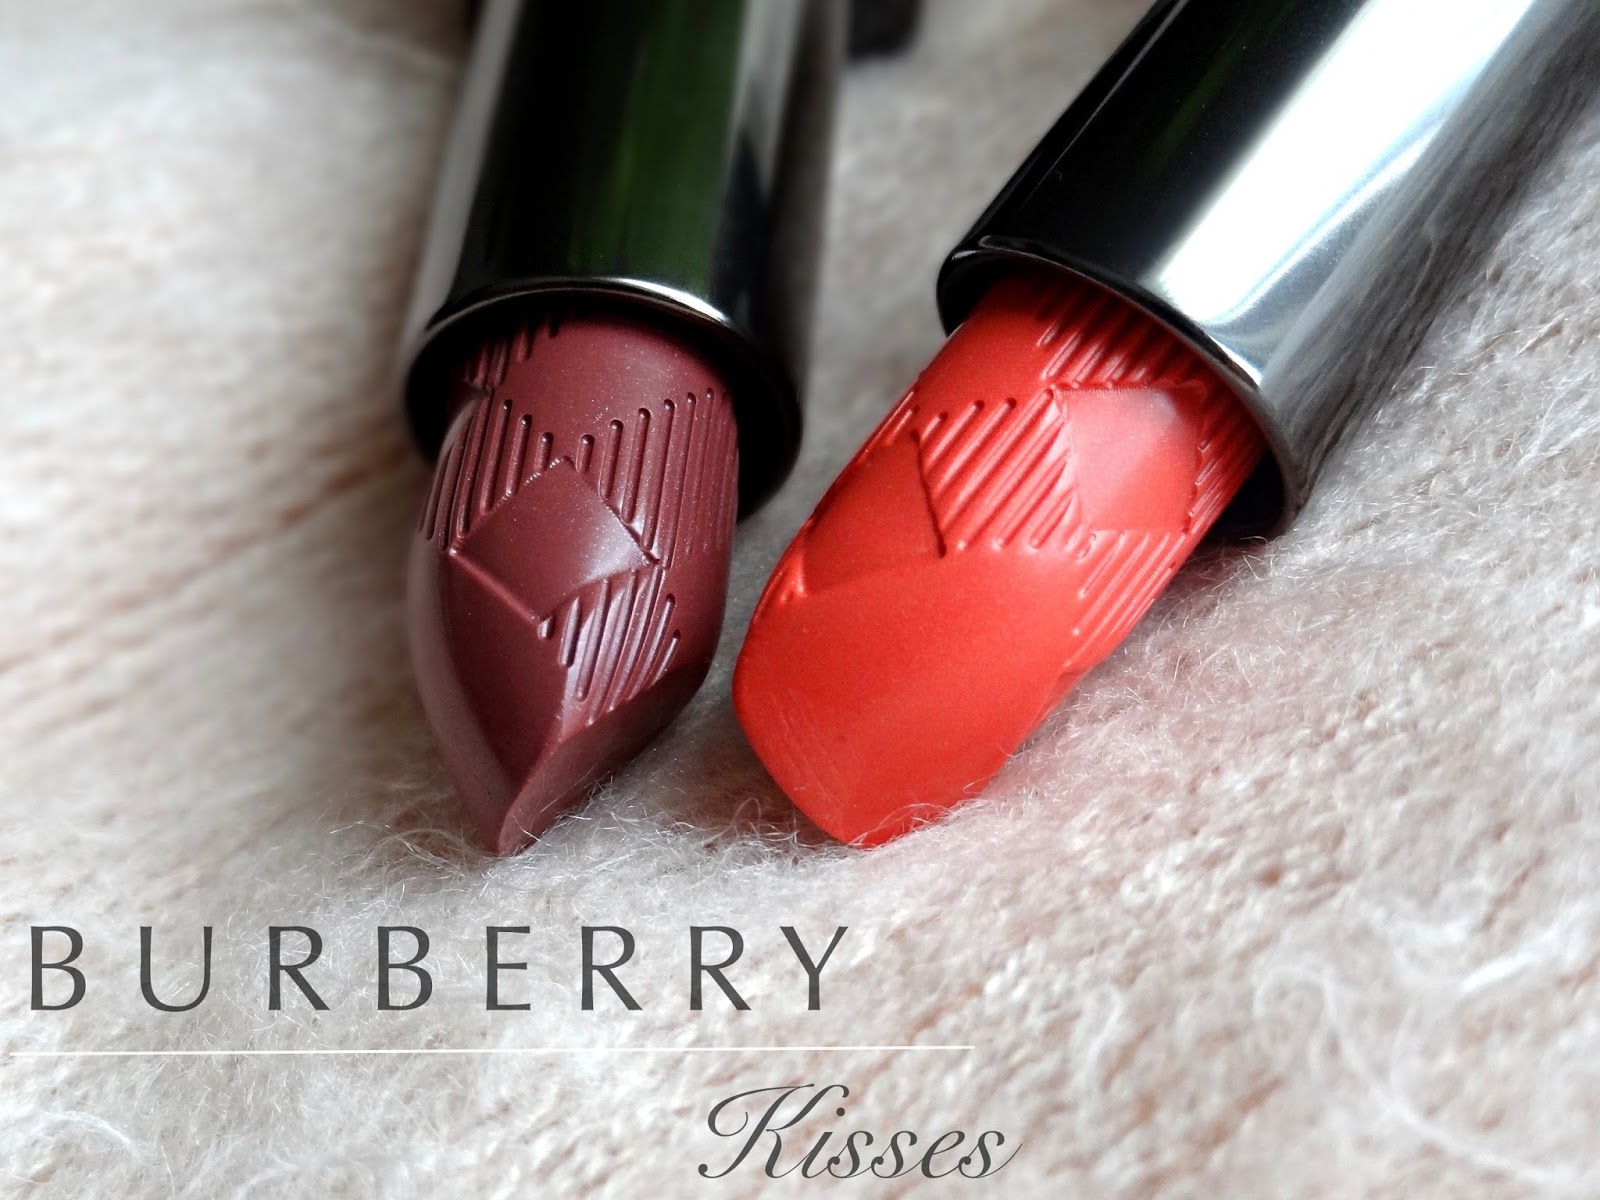 Burberry Kisses Lipsticks in Rose Blush, Coral Pink